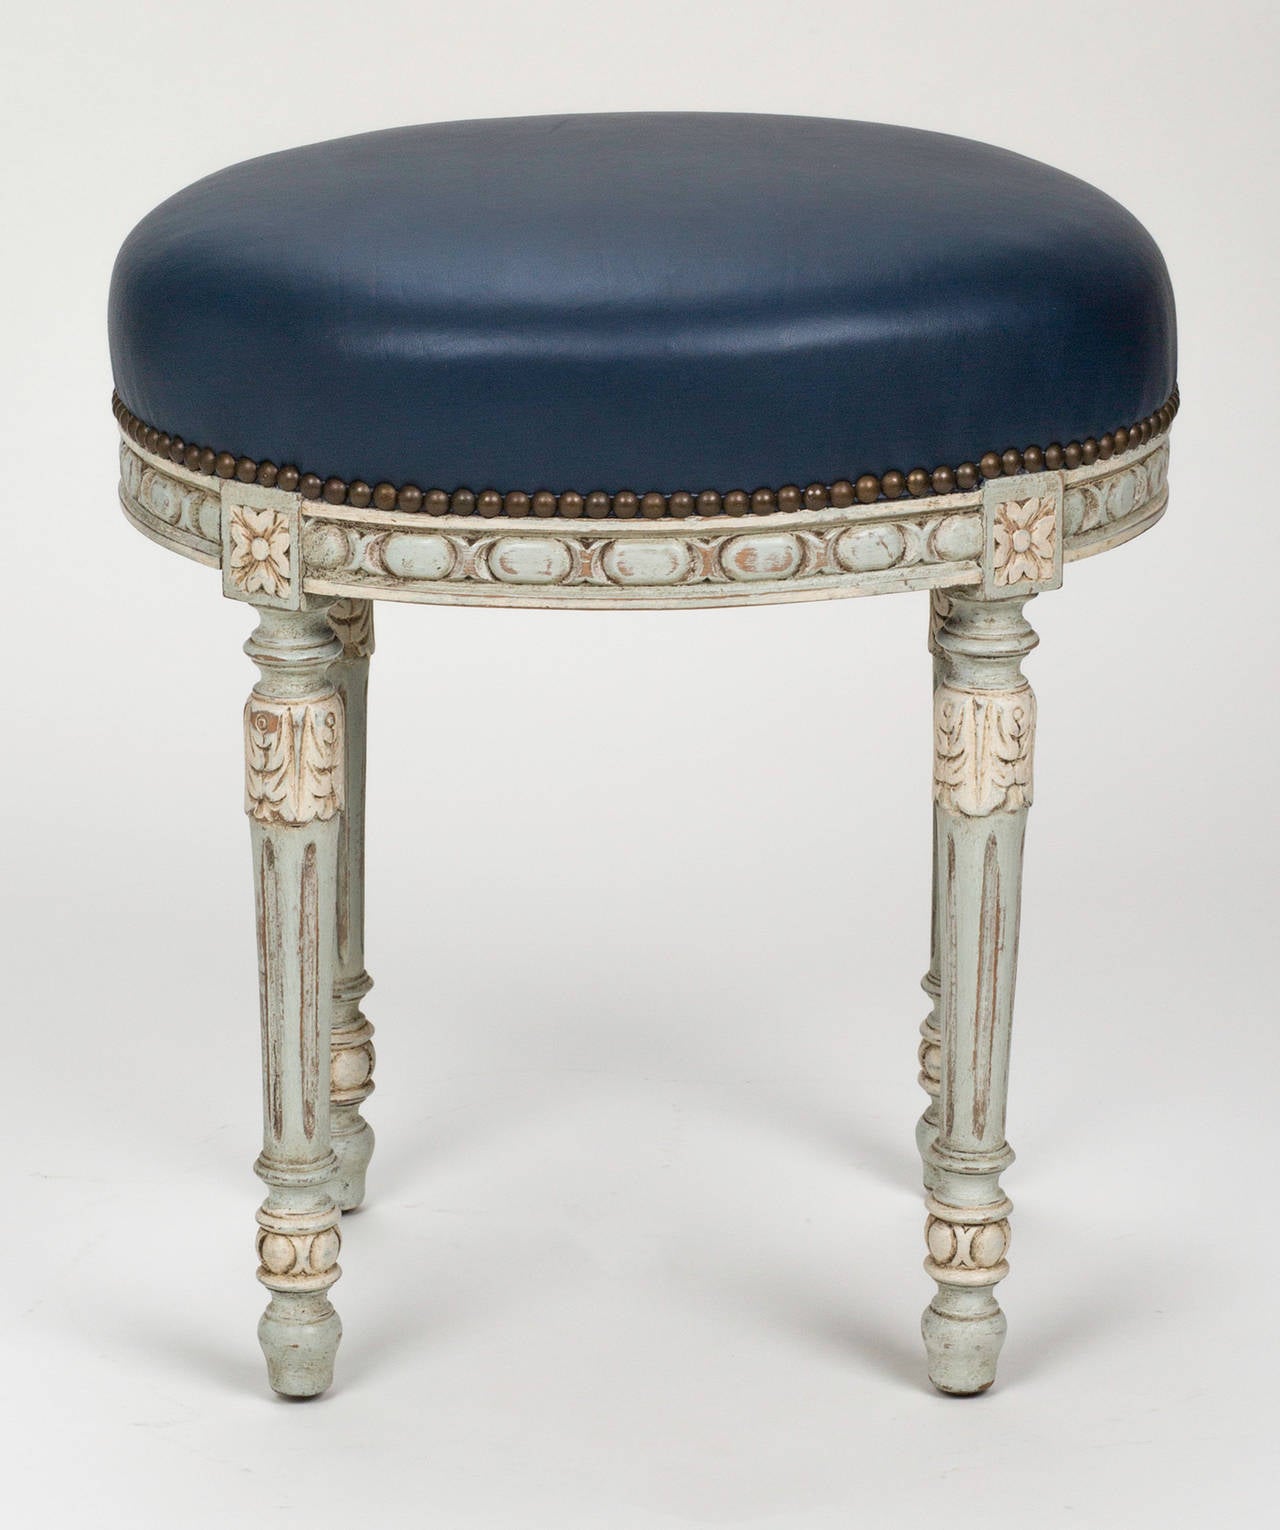 Louis XVI style wood frame in antique painted finish, French, circa 1880s. Newly upholstered in Edelman's leather. Handy footstool or bench.